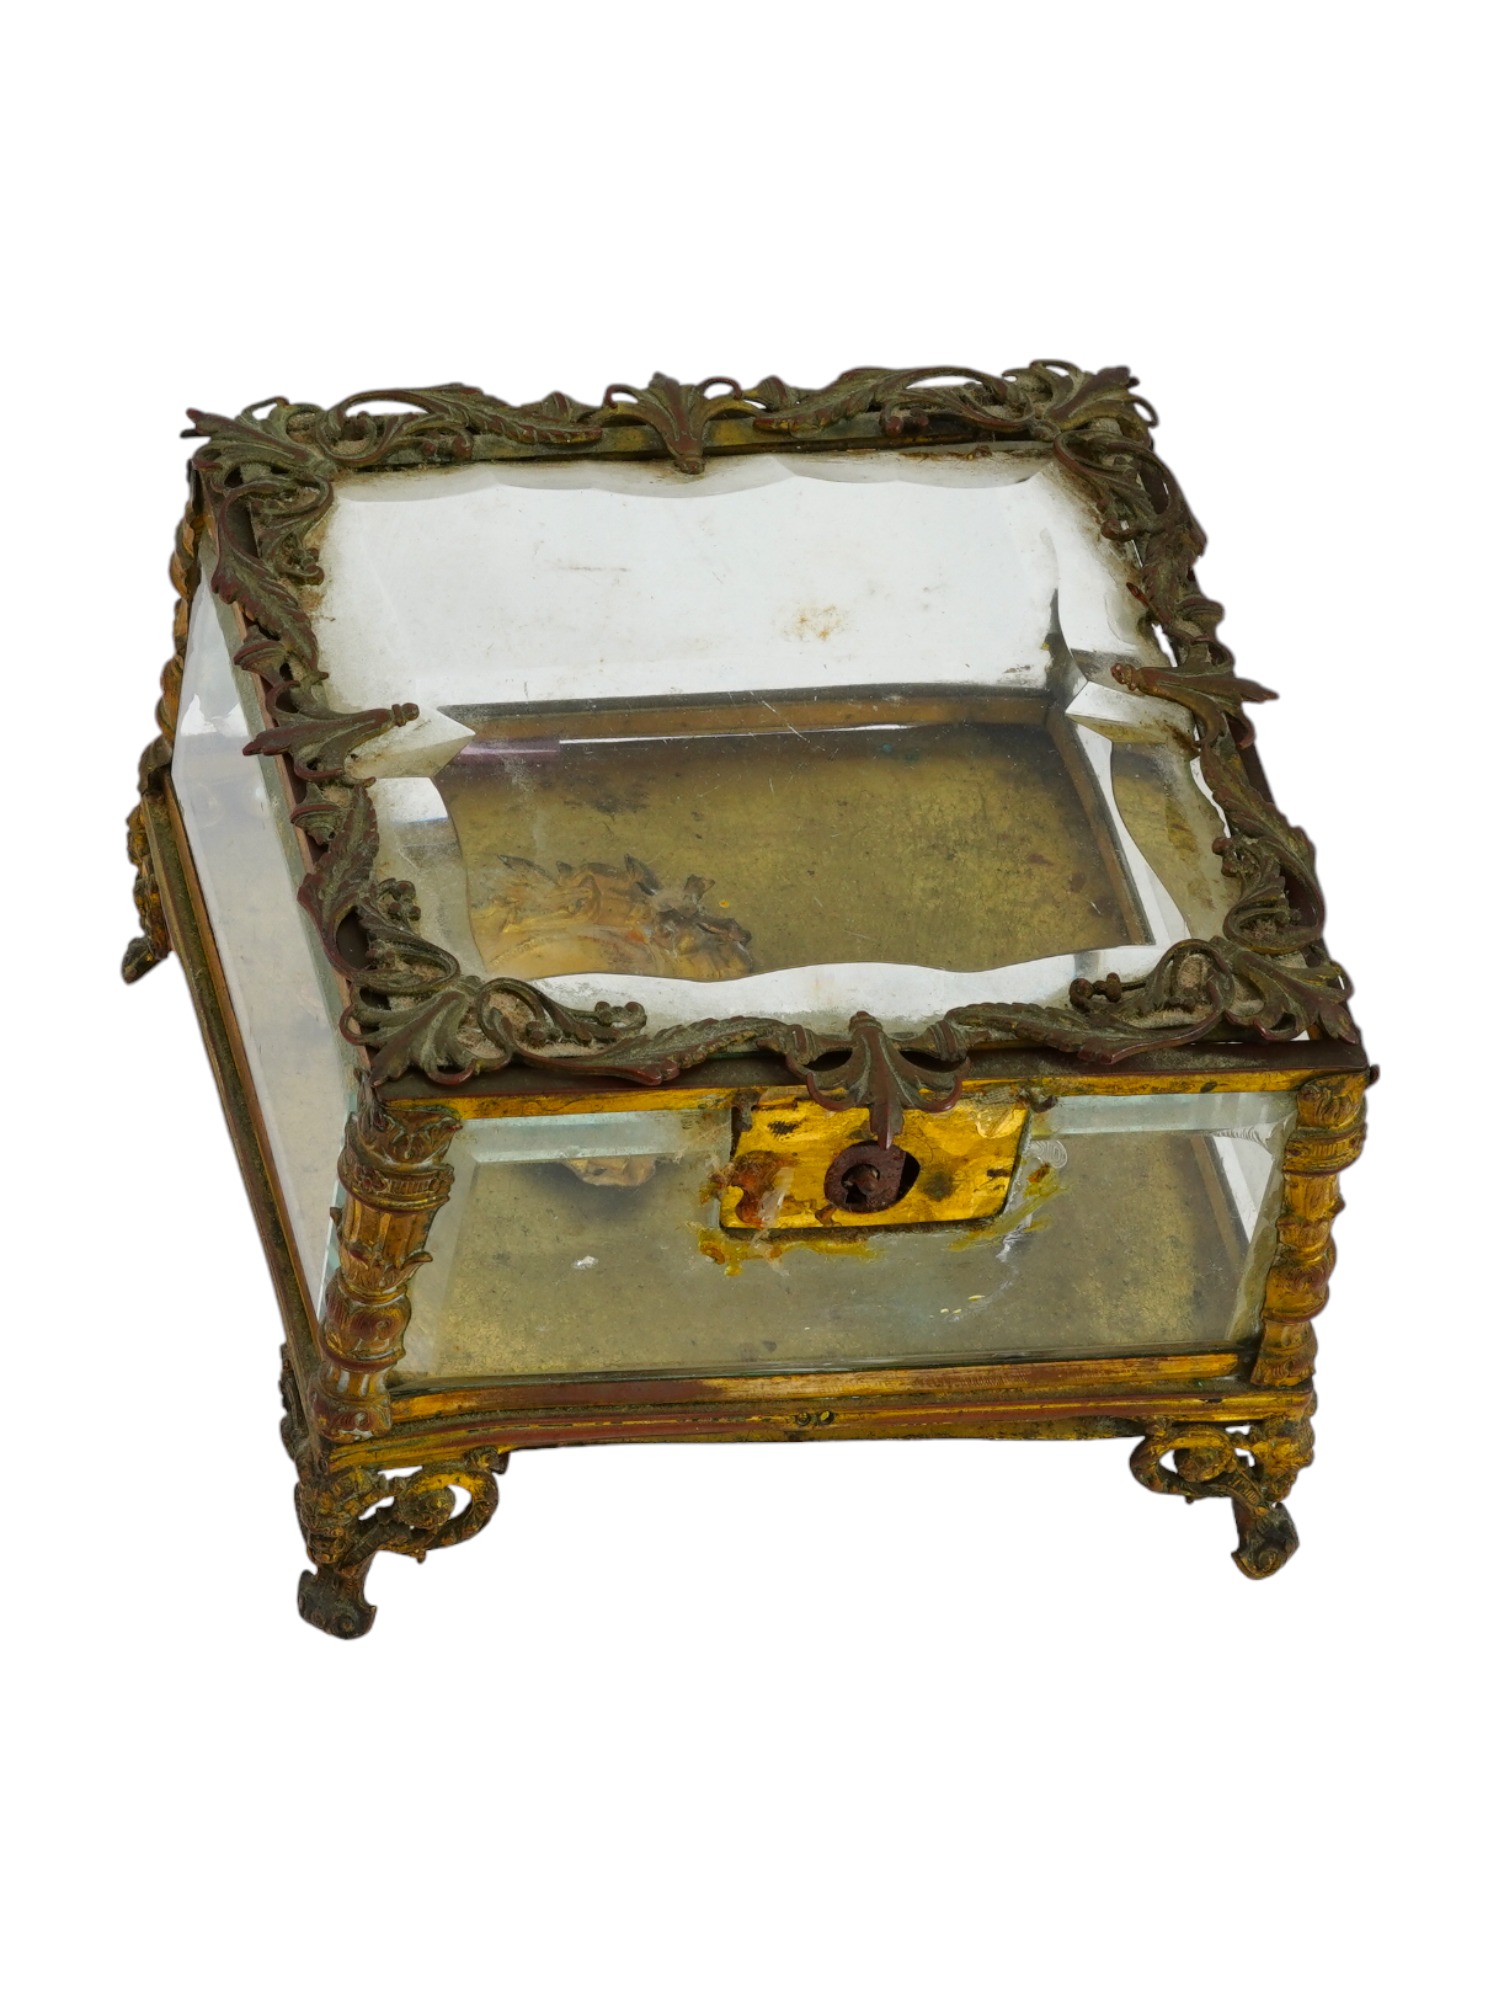 ANTIQUE FRENCH GILT BRONZE CLEAR GLASS TRINKET BOX PIC-2